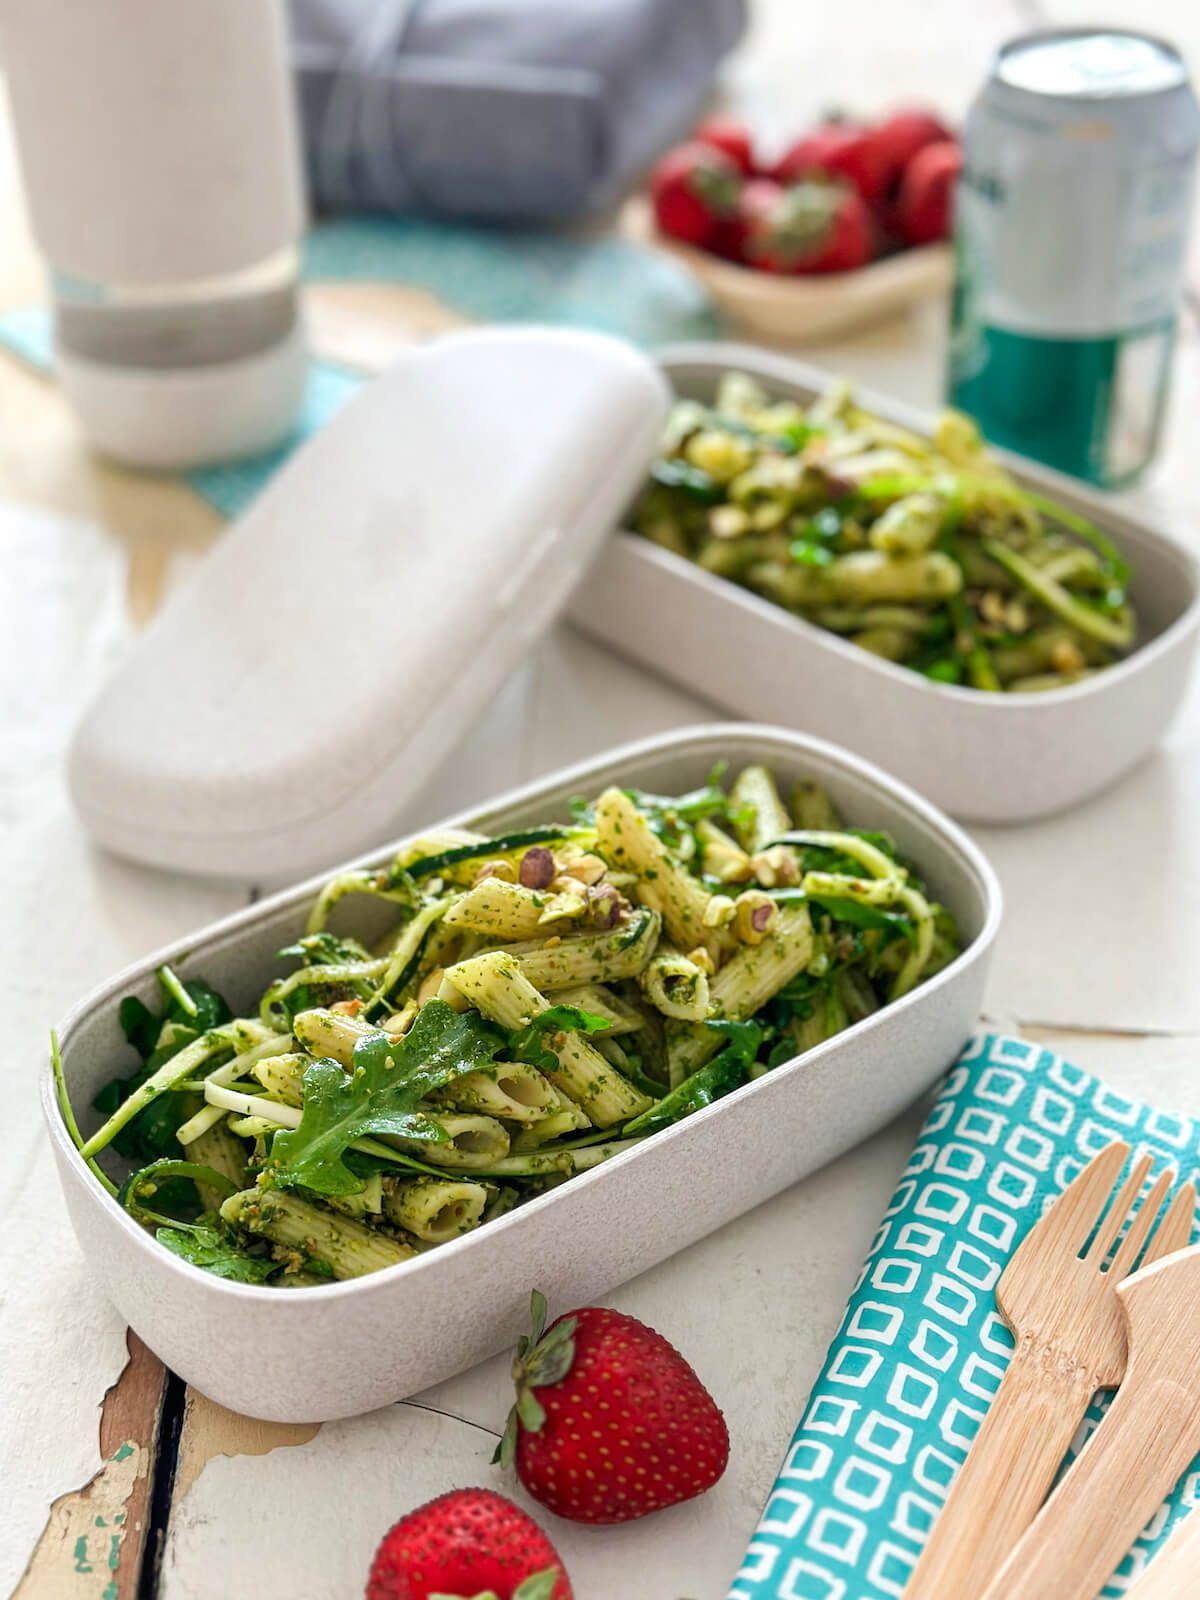 picnic meal in to go containers. pesto pasta with arugula, strawberries and soda.